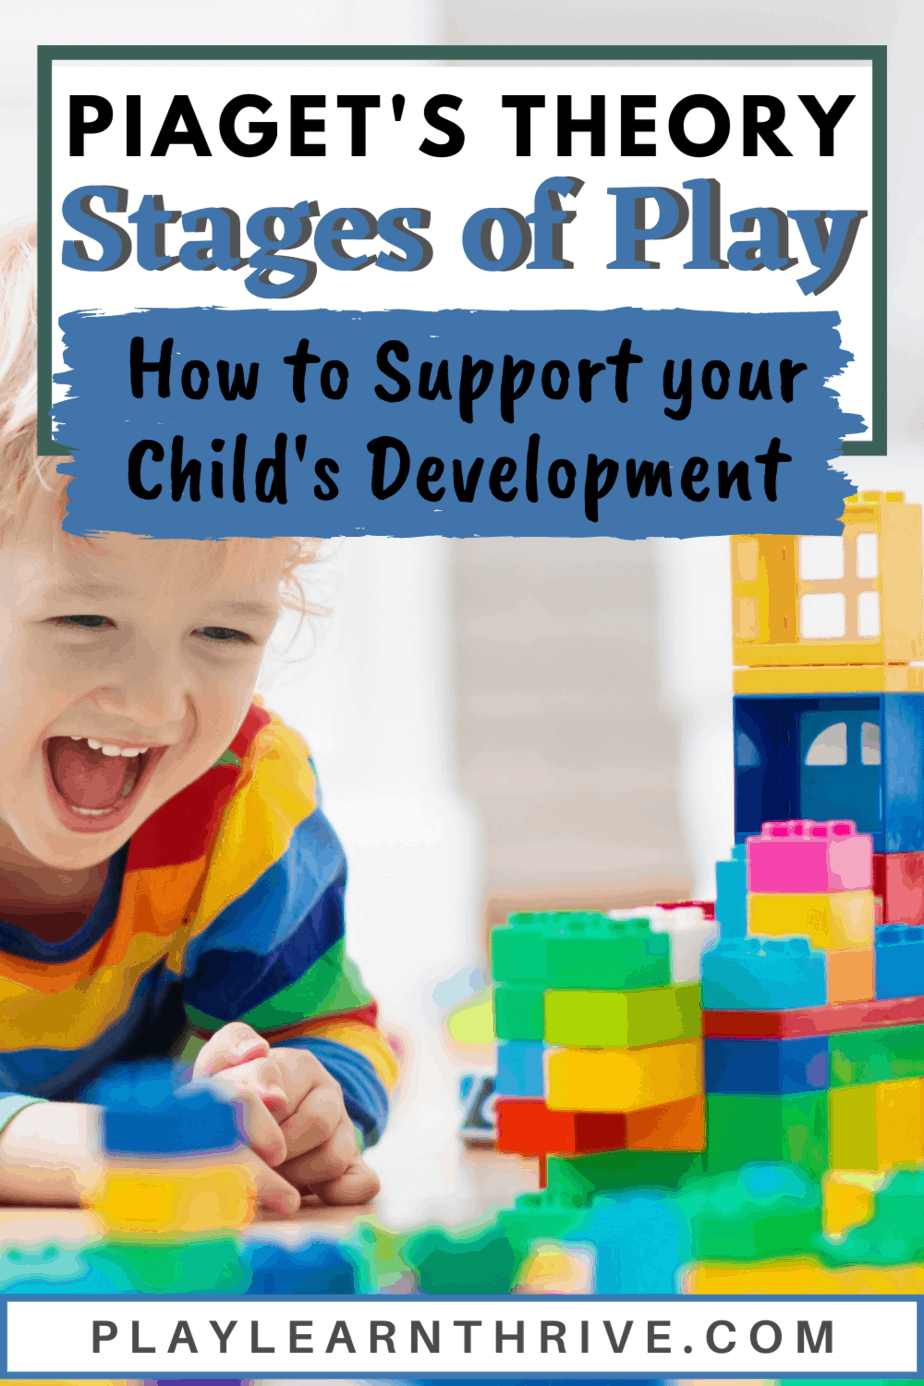 Parallel Play: Why Is It Important for Child Development?